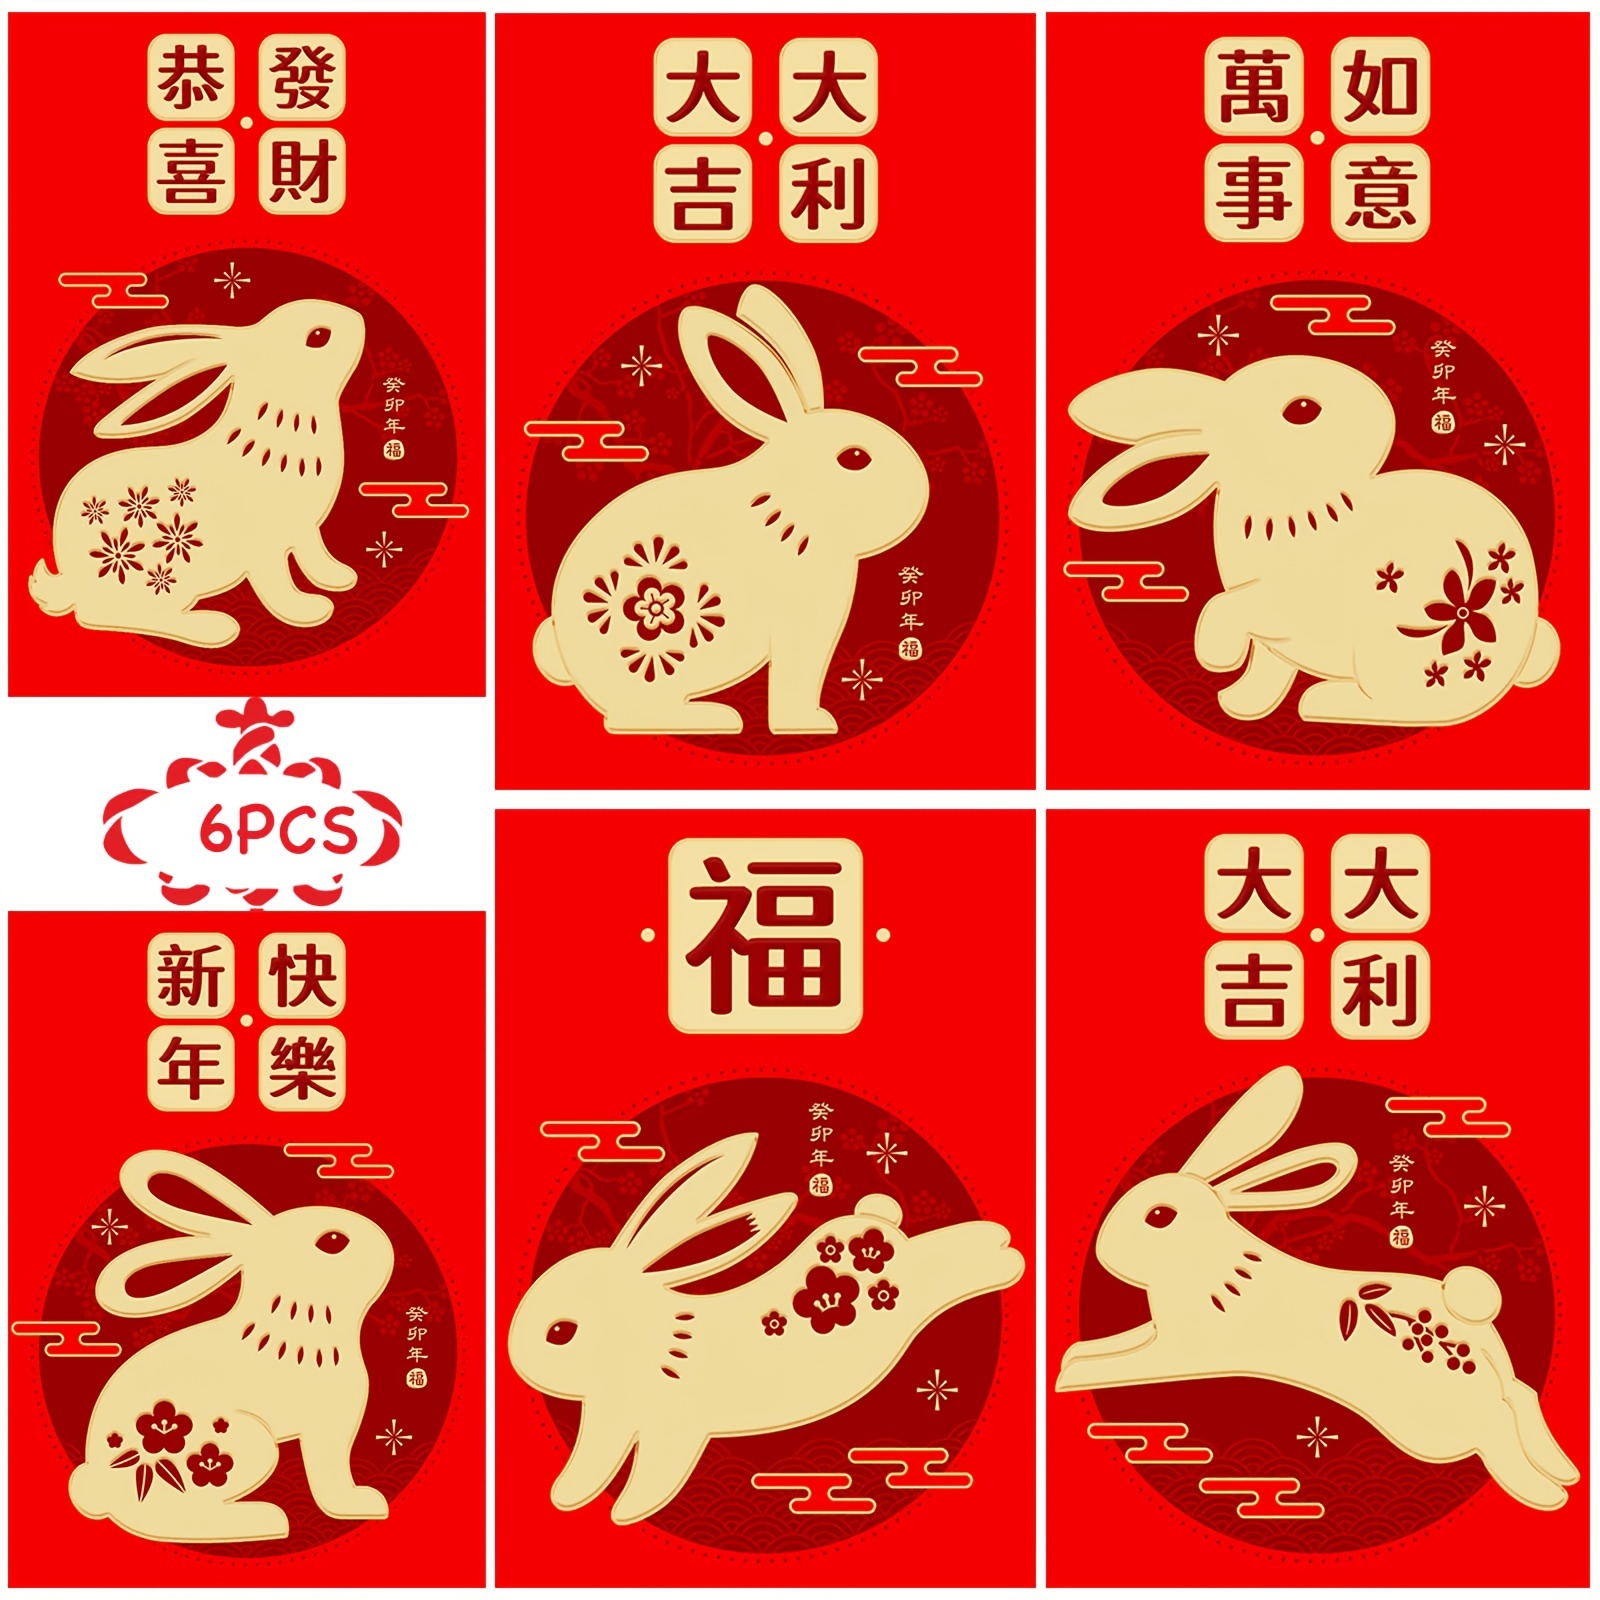 Lunar New Year 2023 Red Envelopes | Chinese New Year 2023 Red Envelopes